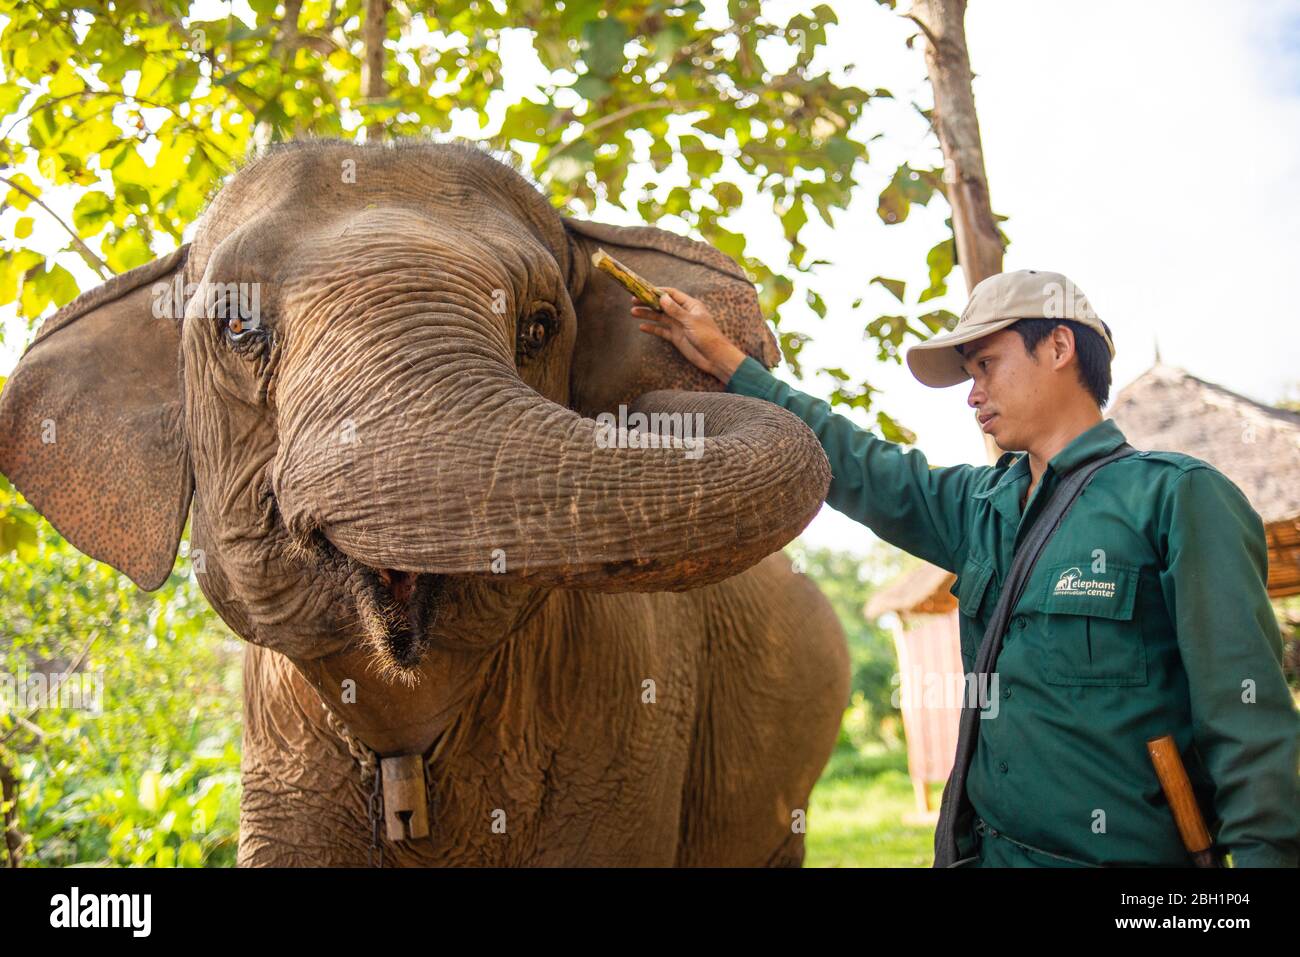 The Elephant Conservation Center is the only organization in Laos who is interested in maintaining the population and breeding of elephants. They have the only elephant hospital and research laboratory in Laos. The Center was created in 2011, and now the team is protecting 29 elephants that had been working in the logging industry or mass tourism, and 530 hectares of forest around Nam Tien Lake in Sayaboury. A special socialization program has been developed by the biologists, where domesticated elephants learn to communicate and survive in the wild under the supervision of specialists. Stock Photo